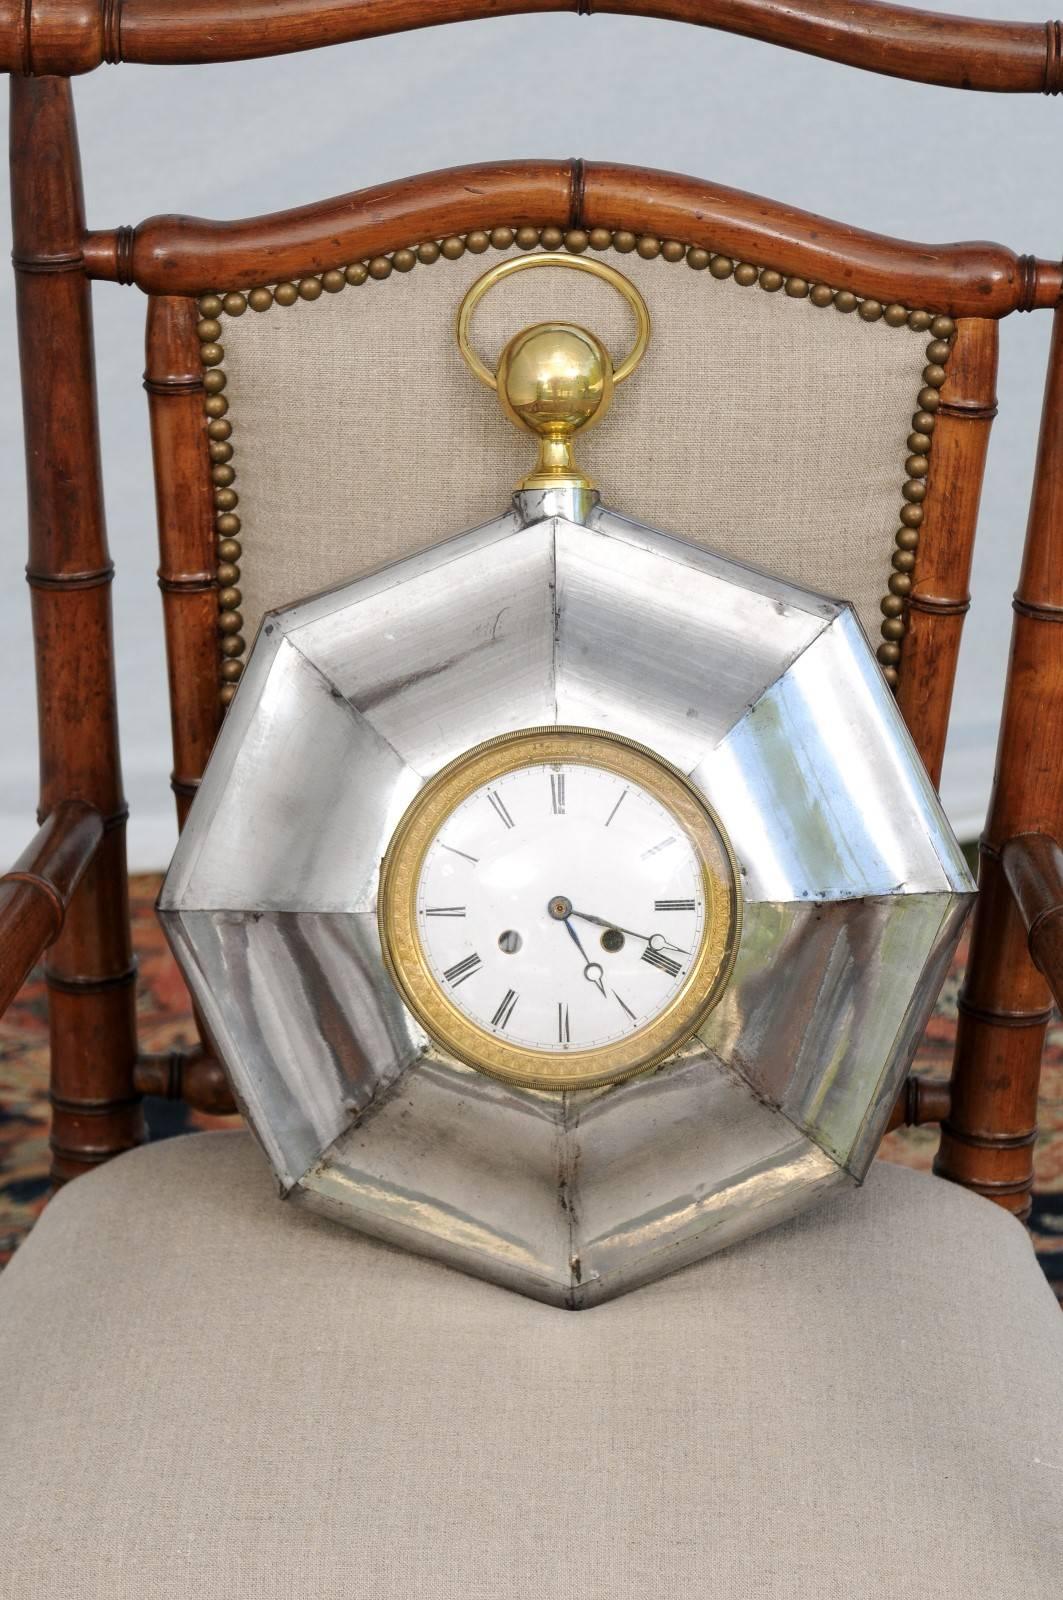 This French small size wall clock from the late 19th century features an octagonal steel frame highlighted with brass accents. The clock is whimsically shaped like a pocket watch, with the typical circular bow at the top, which surrounds a watch's